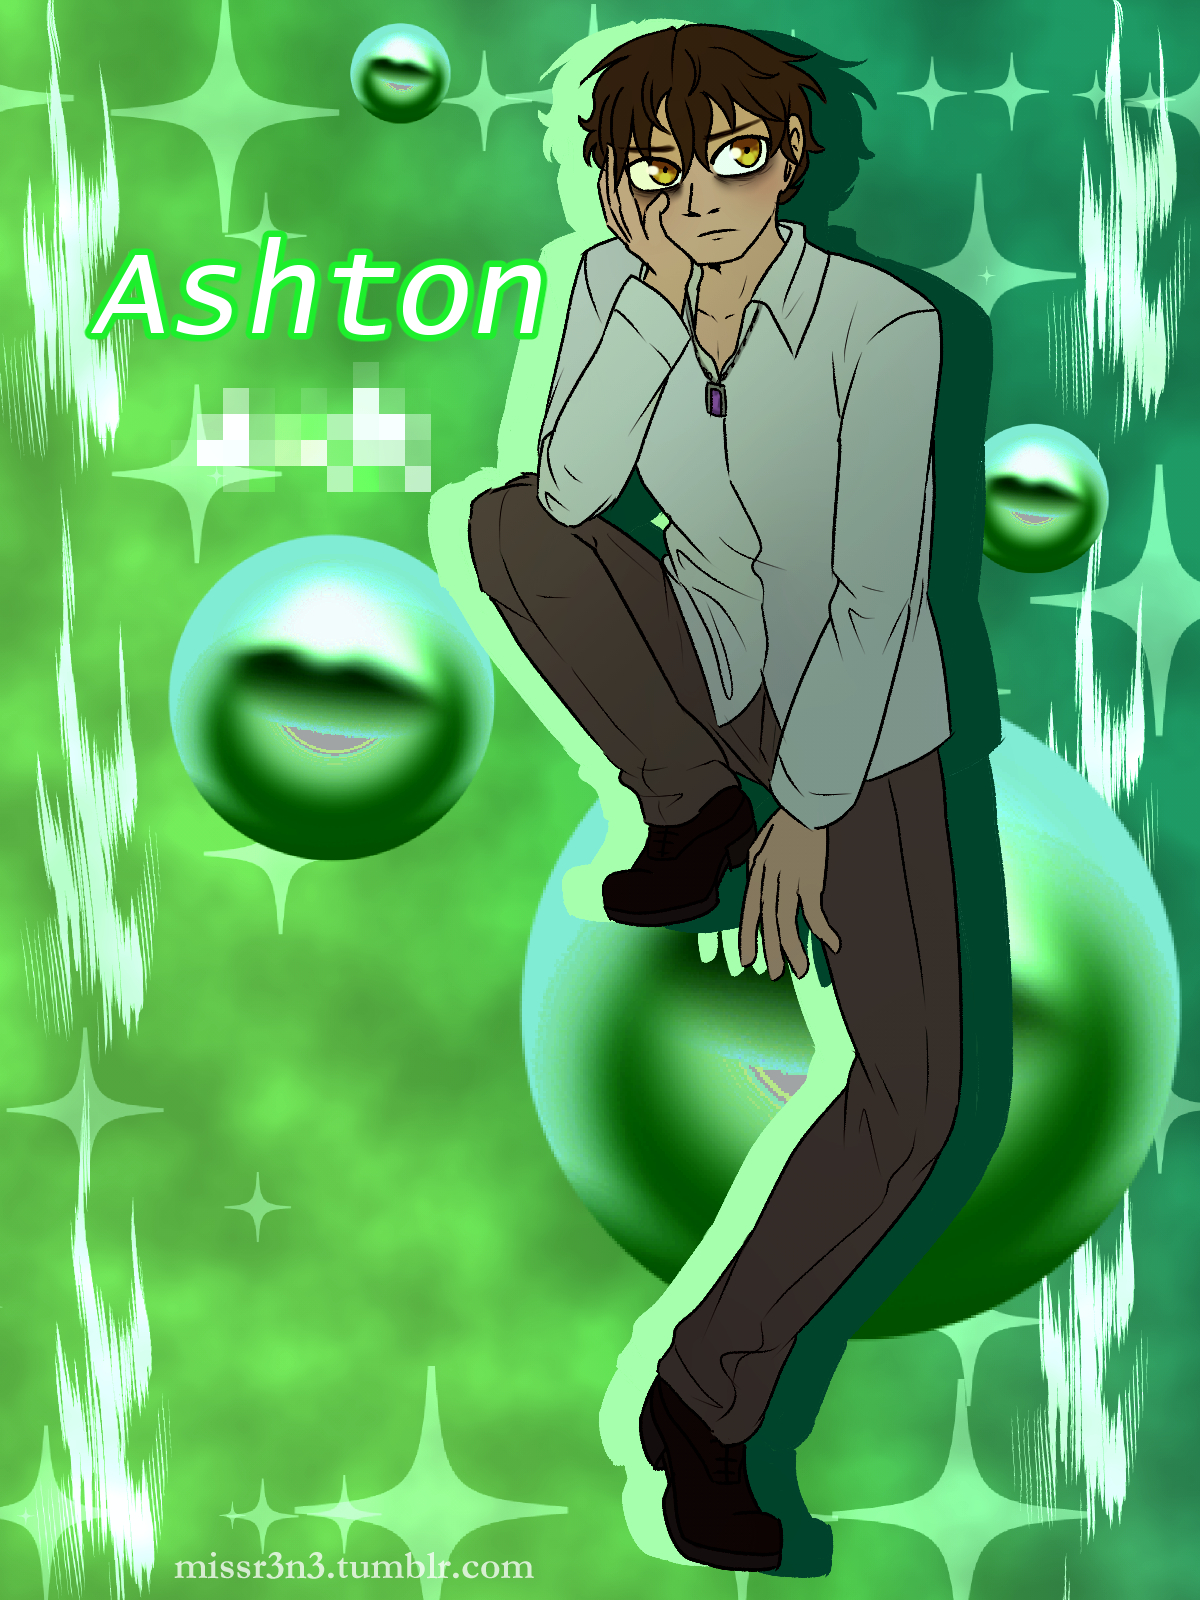 a young man dressed casually in front of a green y2k style background. text beside the man reads 'Ashton' and what appears to be his last name is glitched out and unreadable